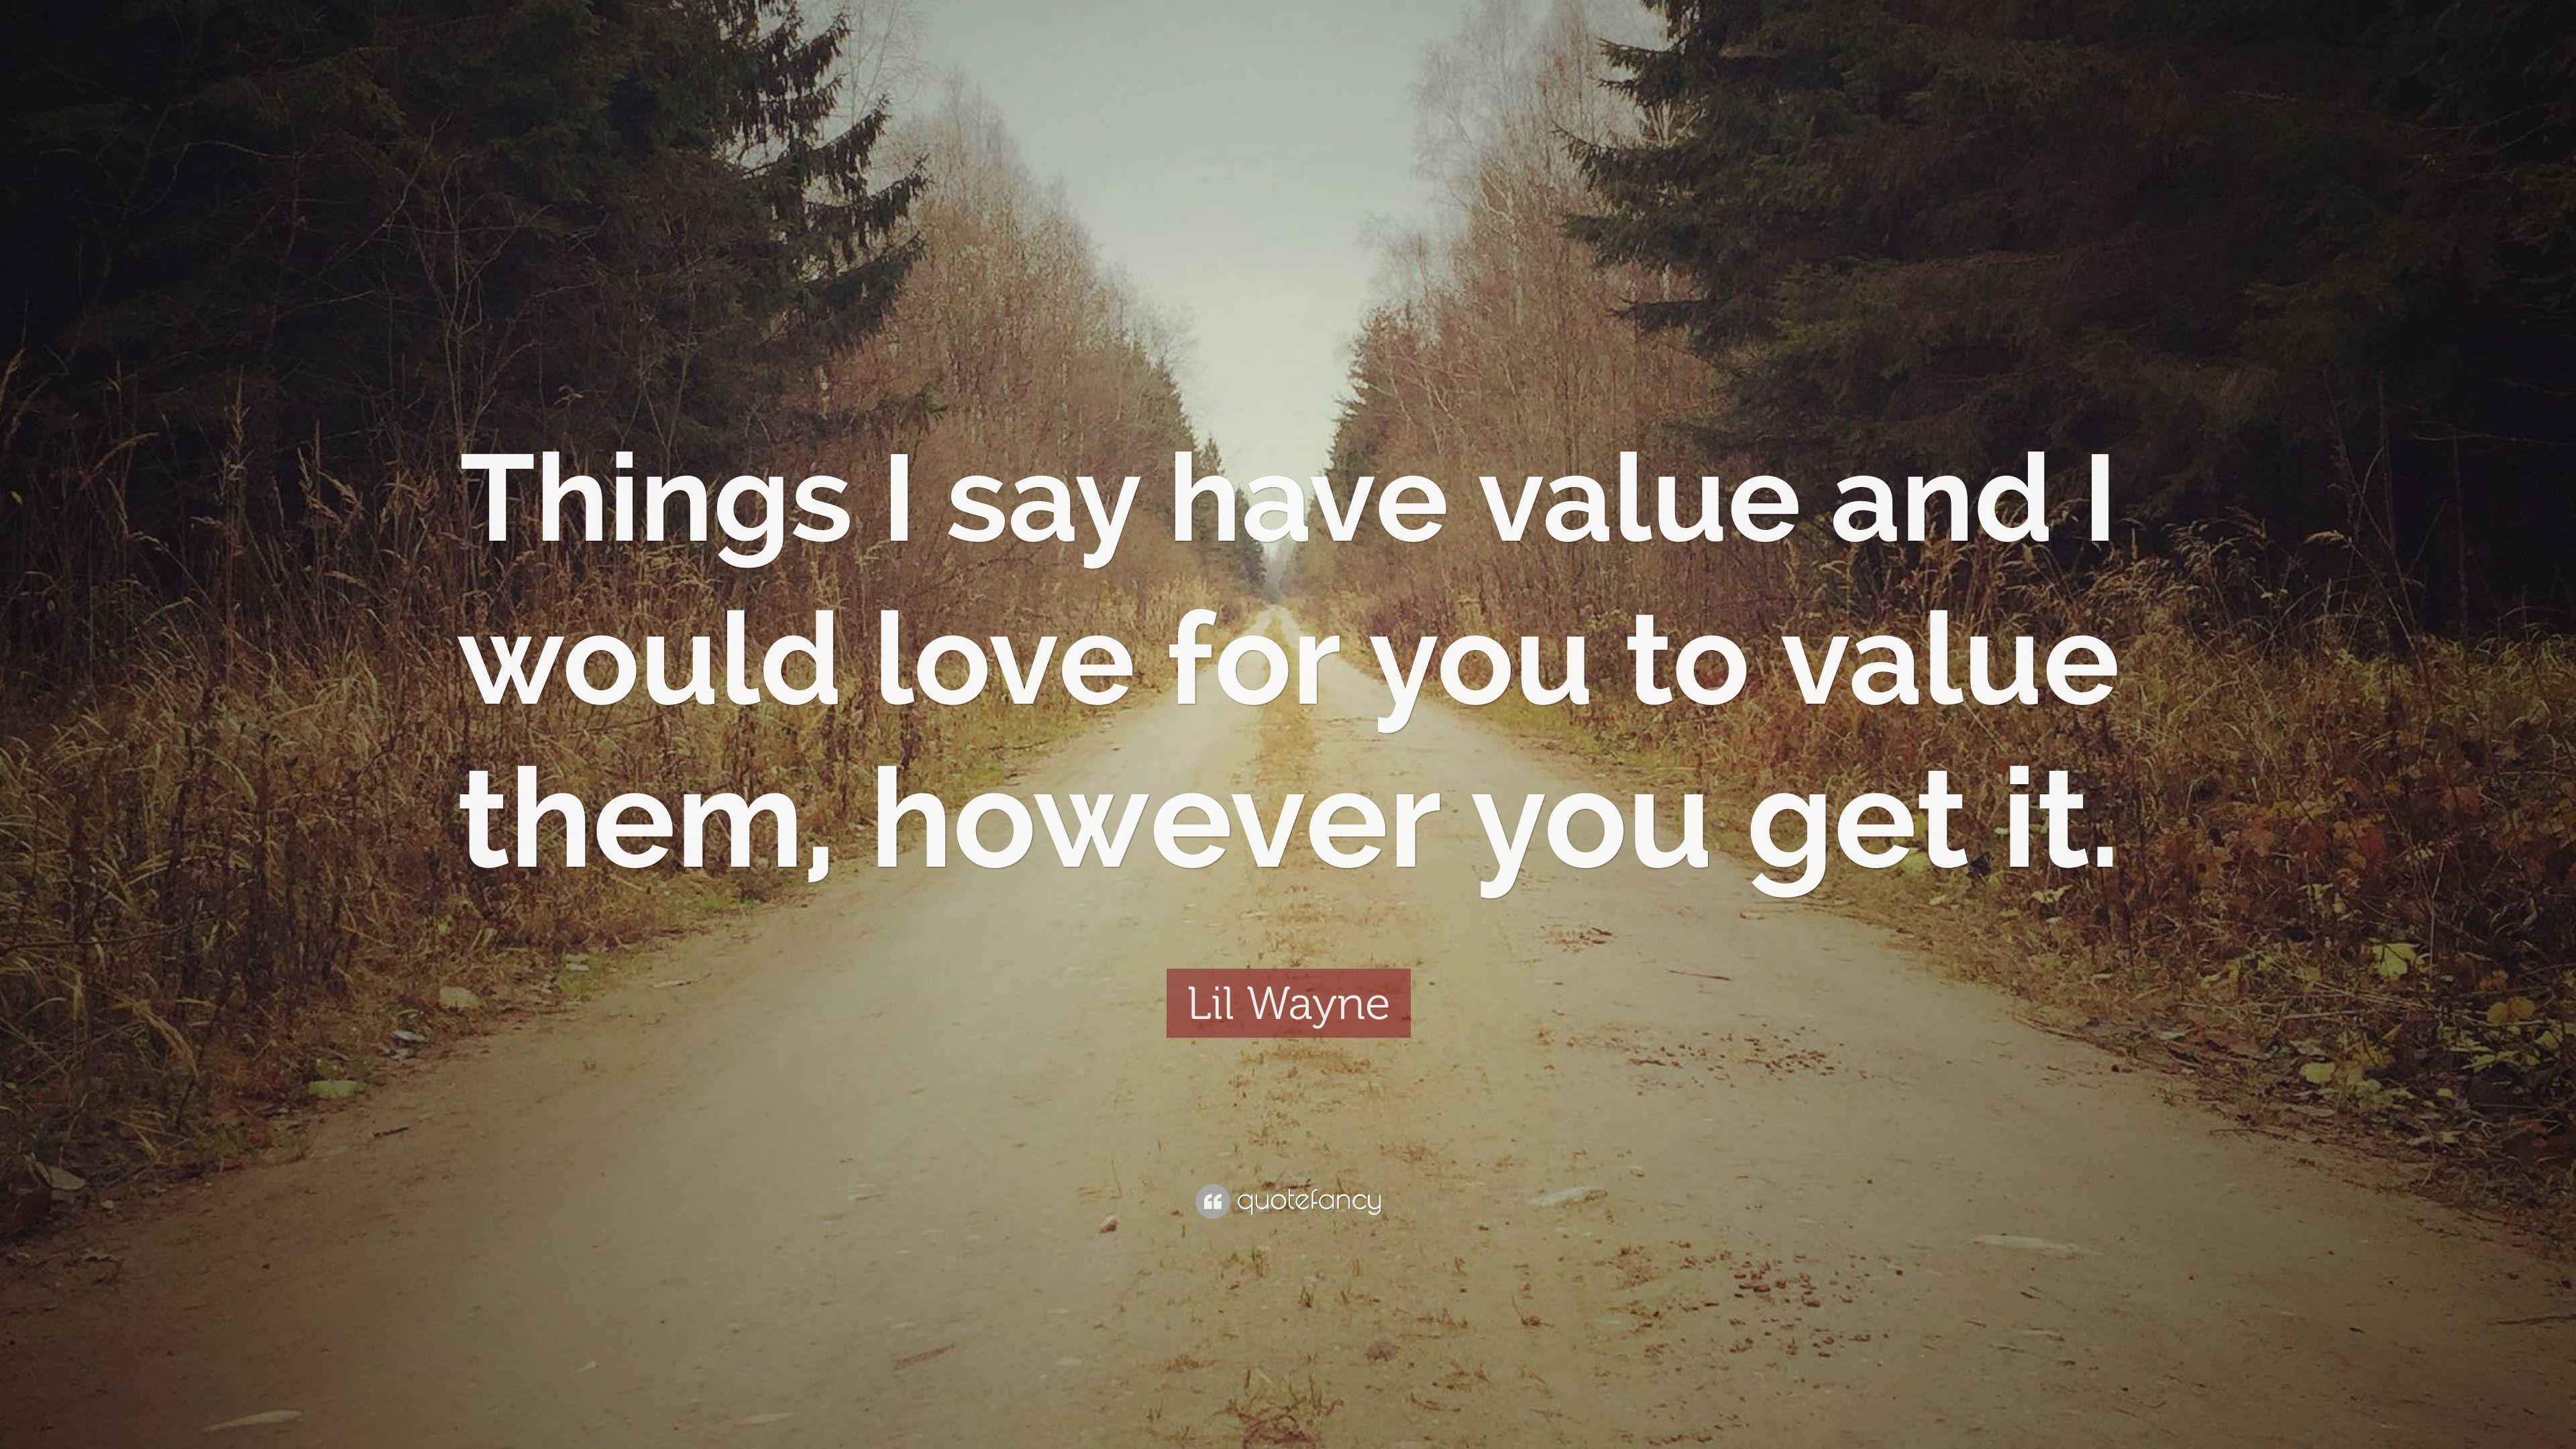 Lil Wayne Quote: “Things I say have value and I would love for you